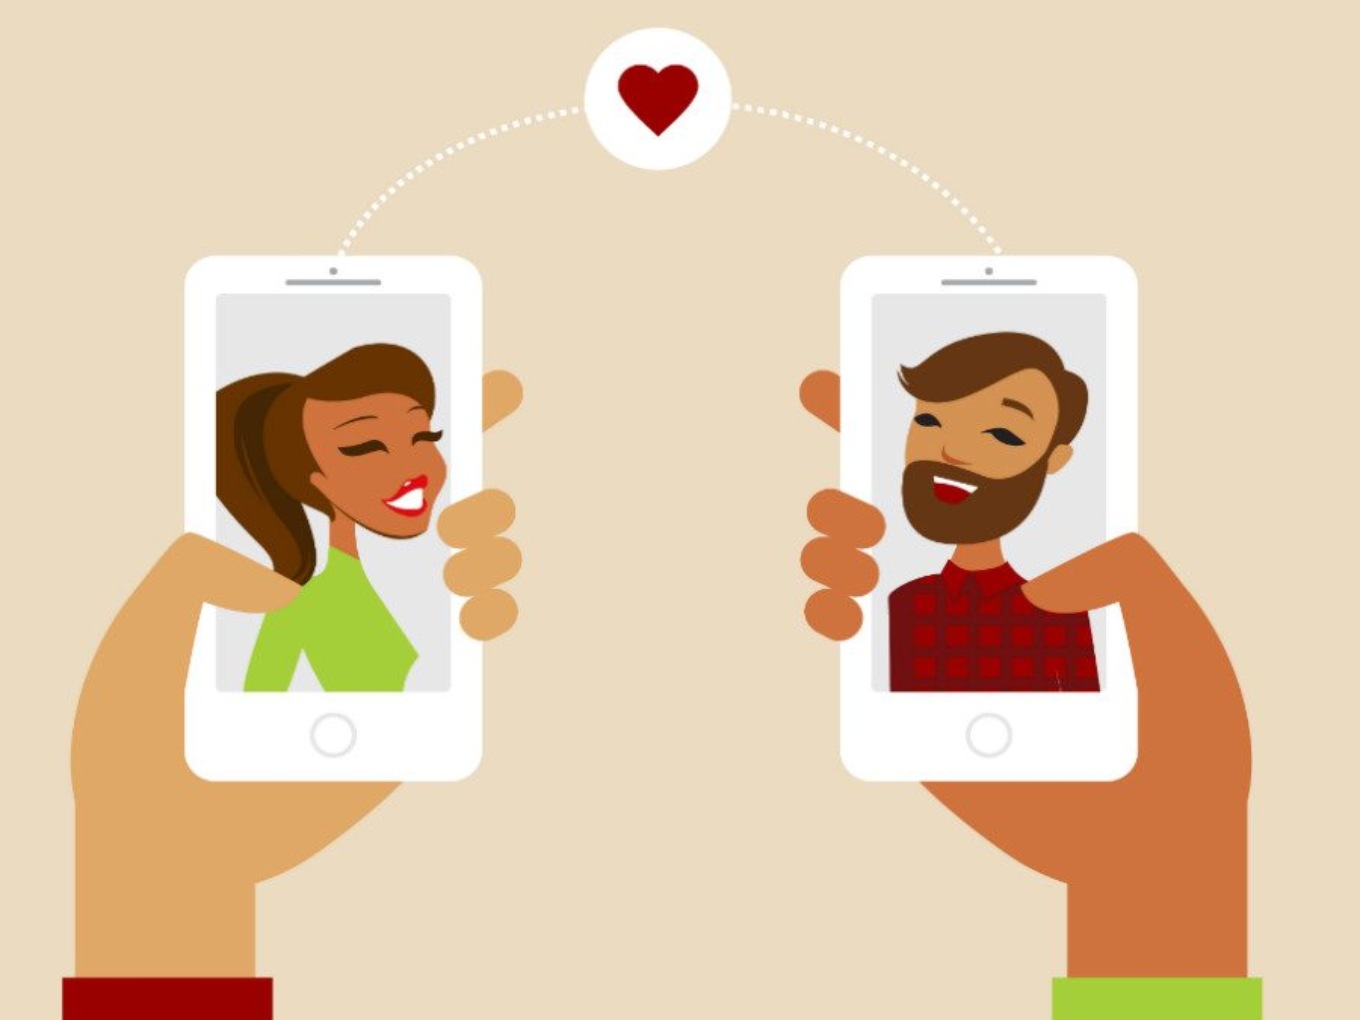 Indian Dating App TrulyMadly Raises Pre-Series A Funding